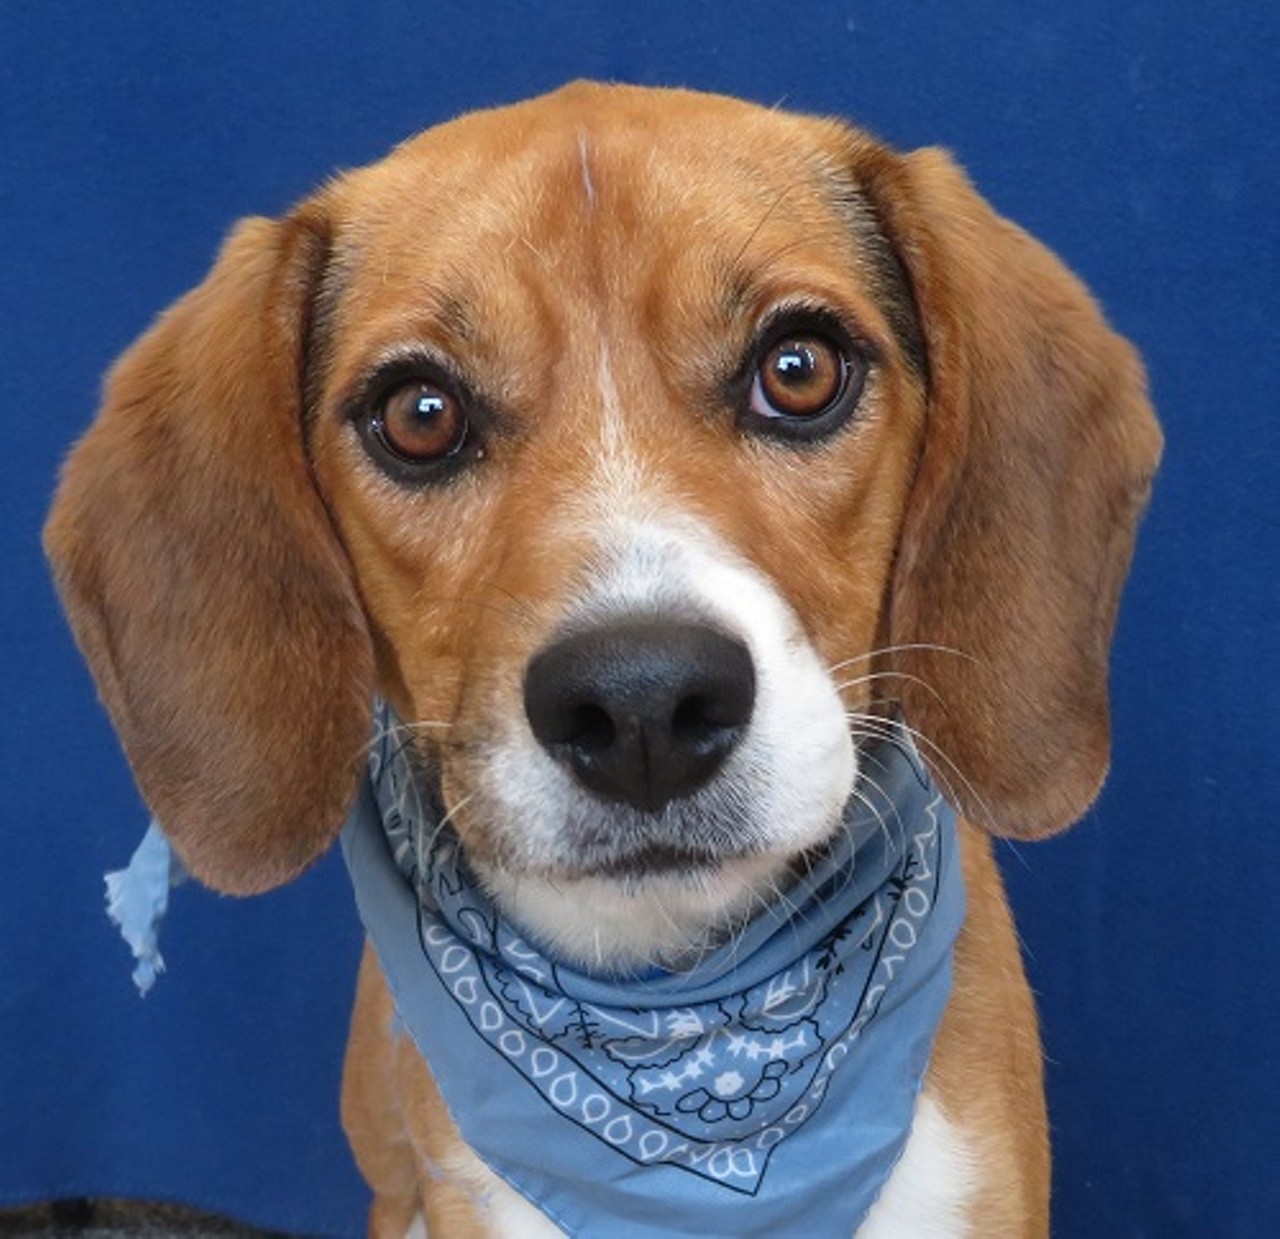 NAME:  Moe
GENDER: Male
BREED: Beagle
AGE: 1 year
WEIGHT: 27 pounds
SPECIAL CONSIDERATIONS: None
REASON I CAME TO MHS: Homeless in Detroit
LOCATION: Mackey Center for Animal Care in Detroit
ID NUMBER: 868400